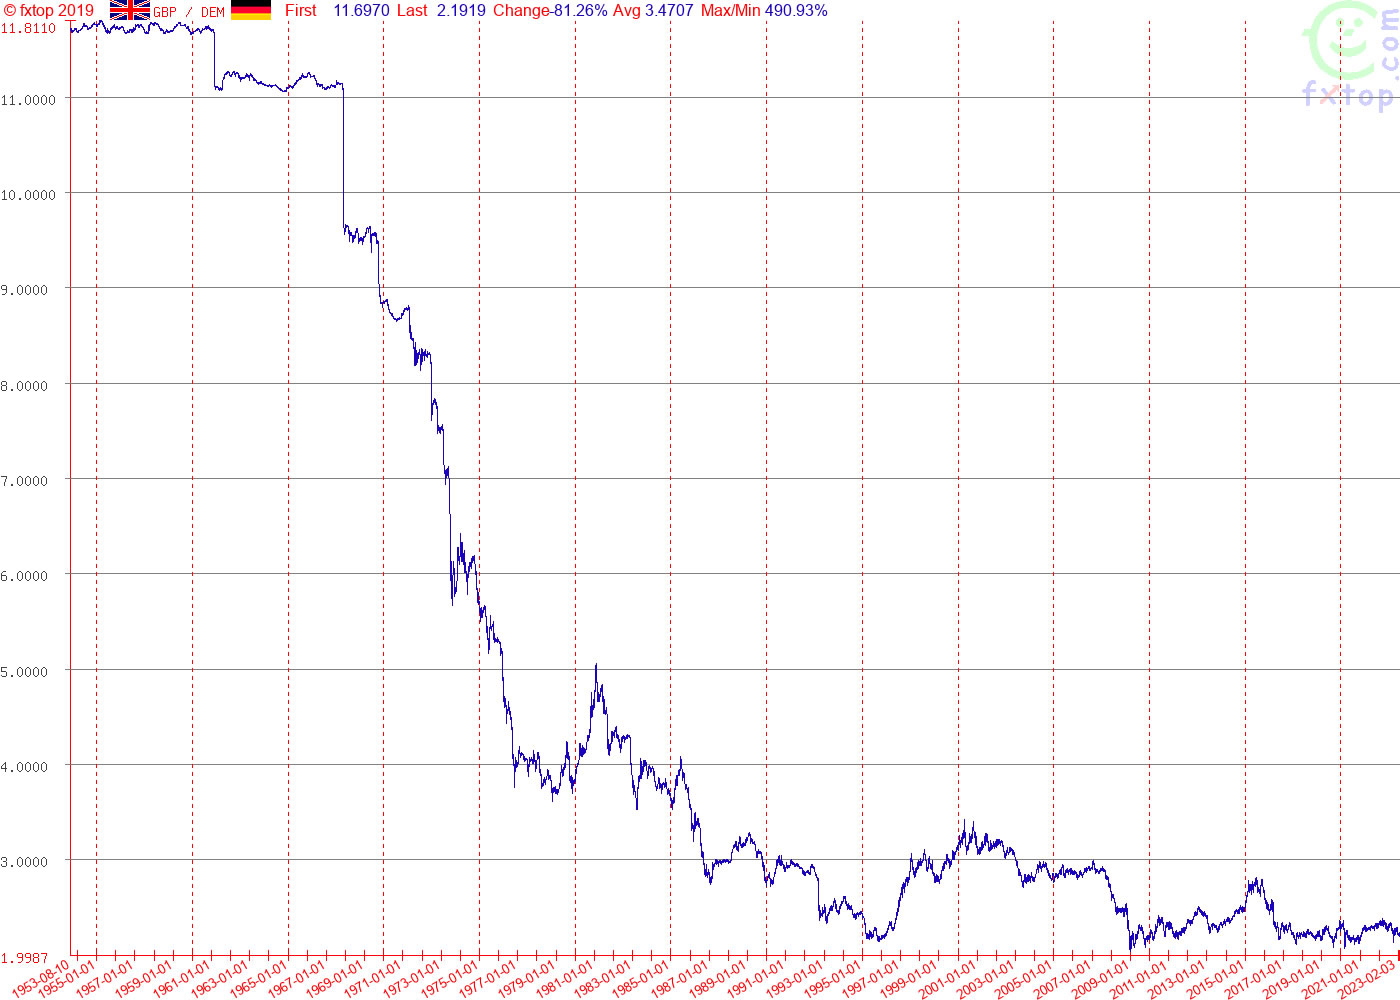 Graph of the exchange rate of the pound sterling (GBP) against the Deutschmark (DEM) 1953-2023.